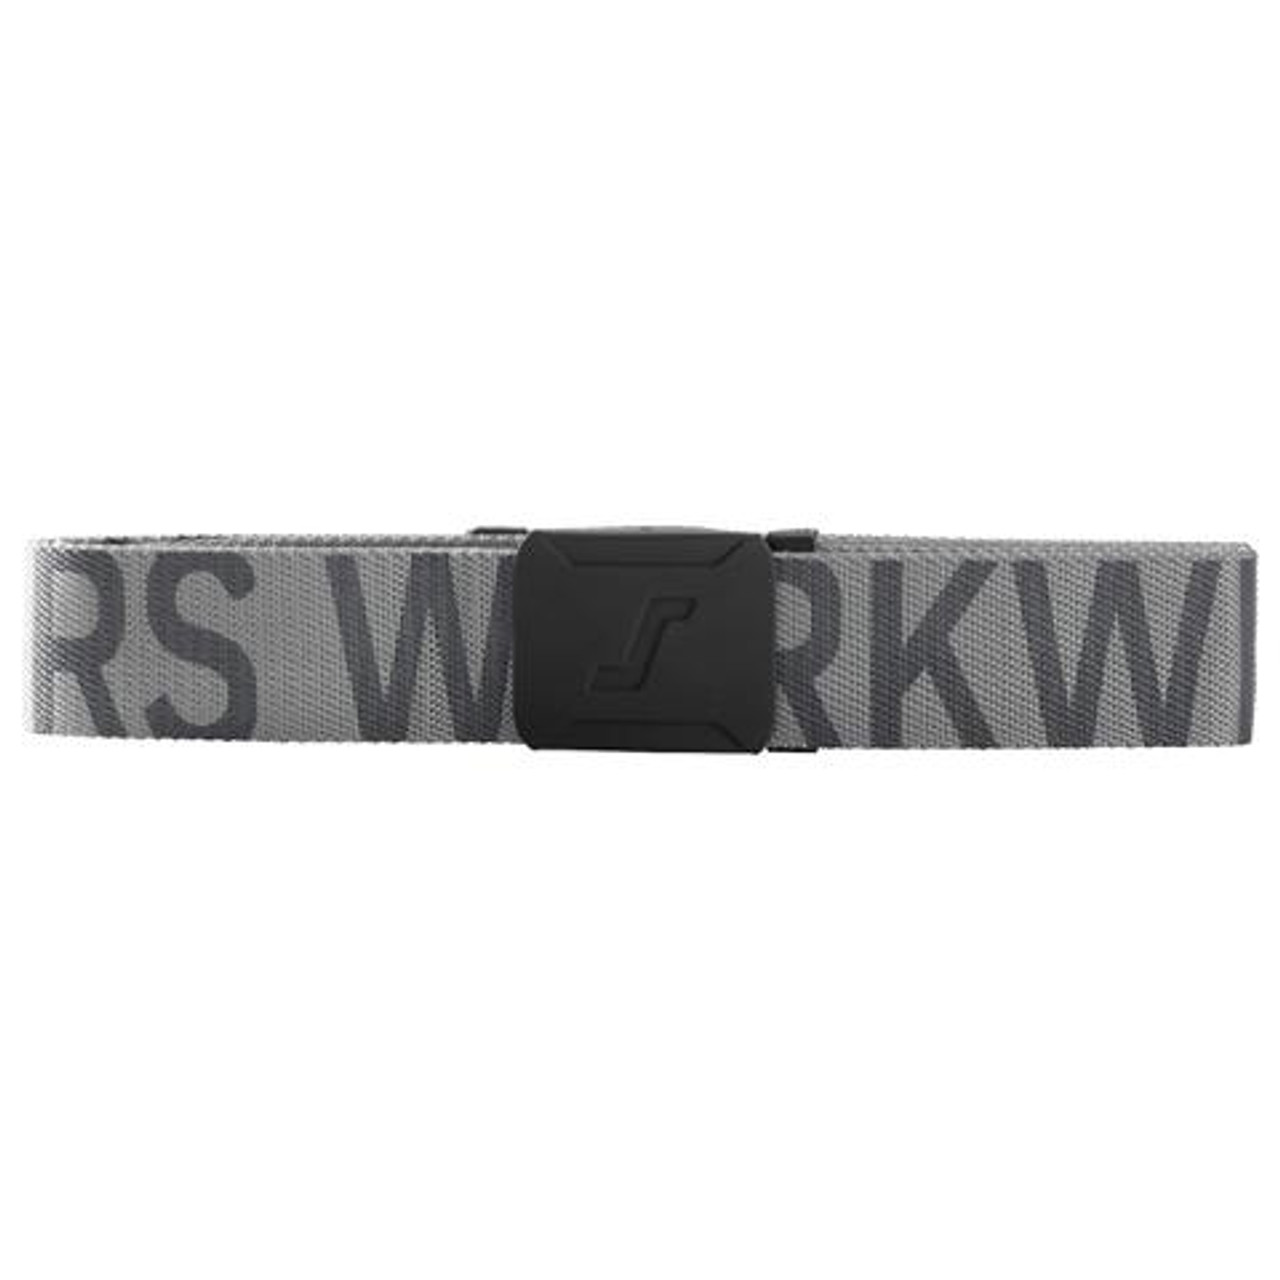 Grey SNICKERS 9004 Tool Belt with logo in webbing, designed for functionality and durability